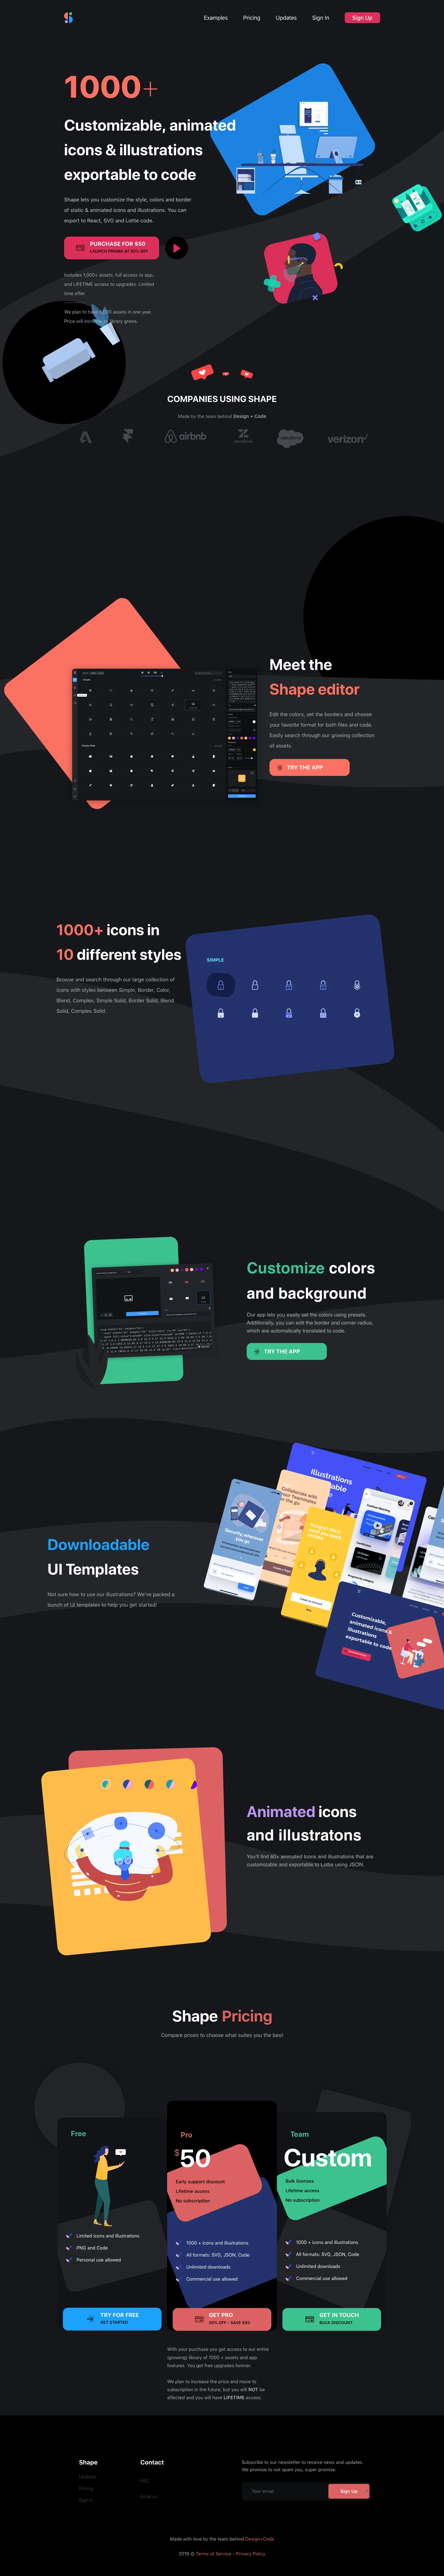 Shape Landing Page Example: 1000+ customizable, animated icons & illustrations exportable to codeShape lets you customize the style, colors and border of static & animated icons and illustrations. You can export to React, SVG and Lottie code.